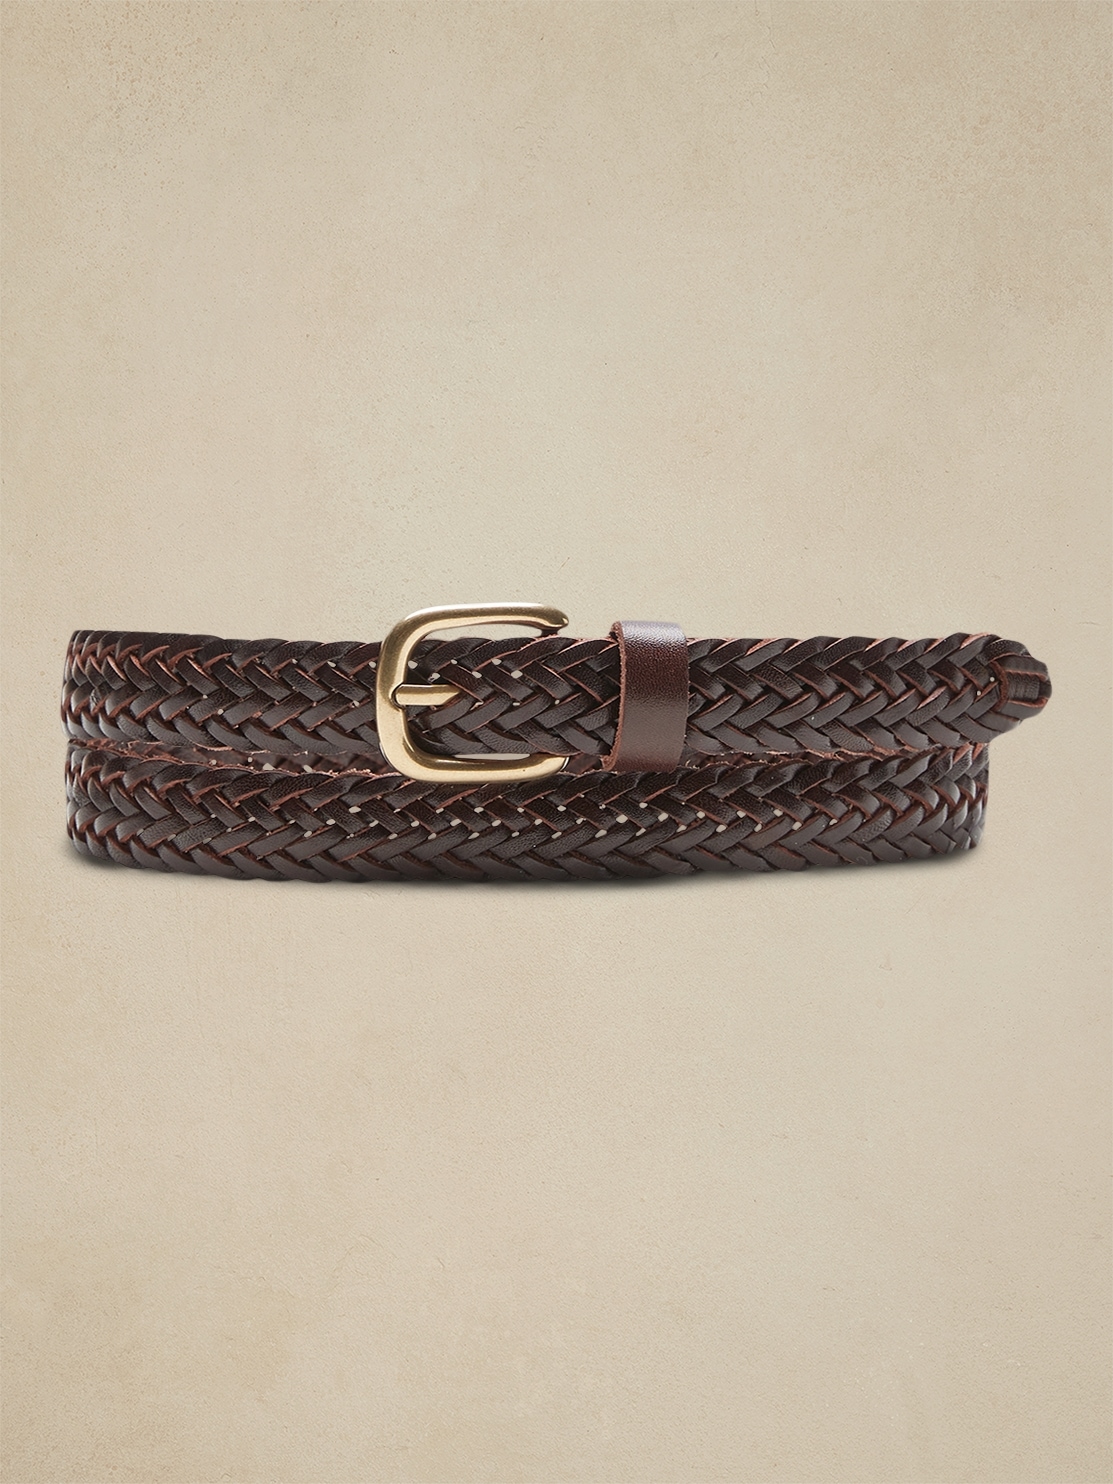 Black Skinny Braided Belt with Bronze, Silver and Brass Micro Studs